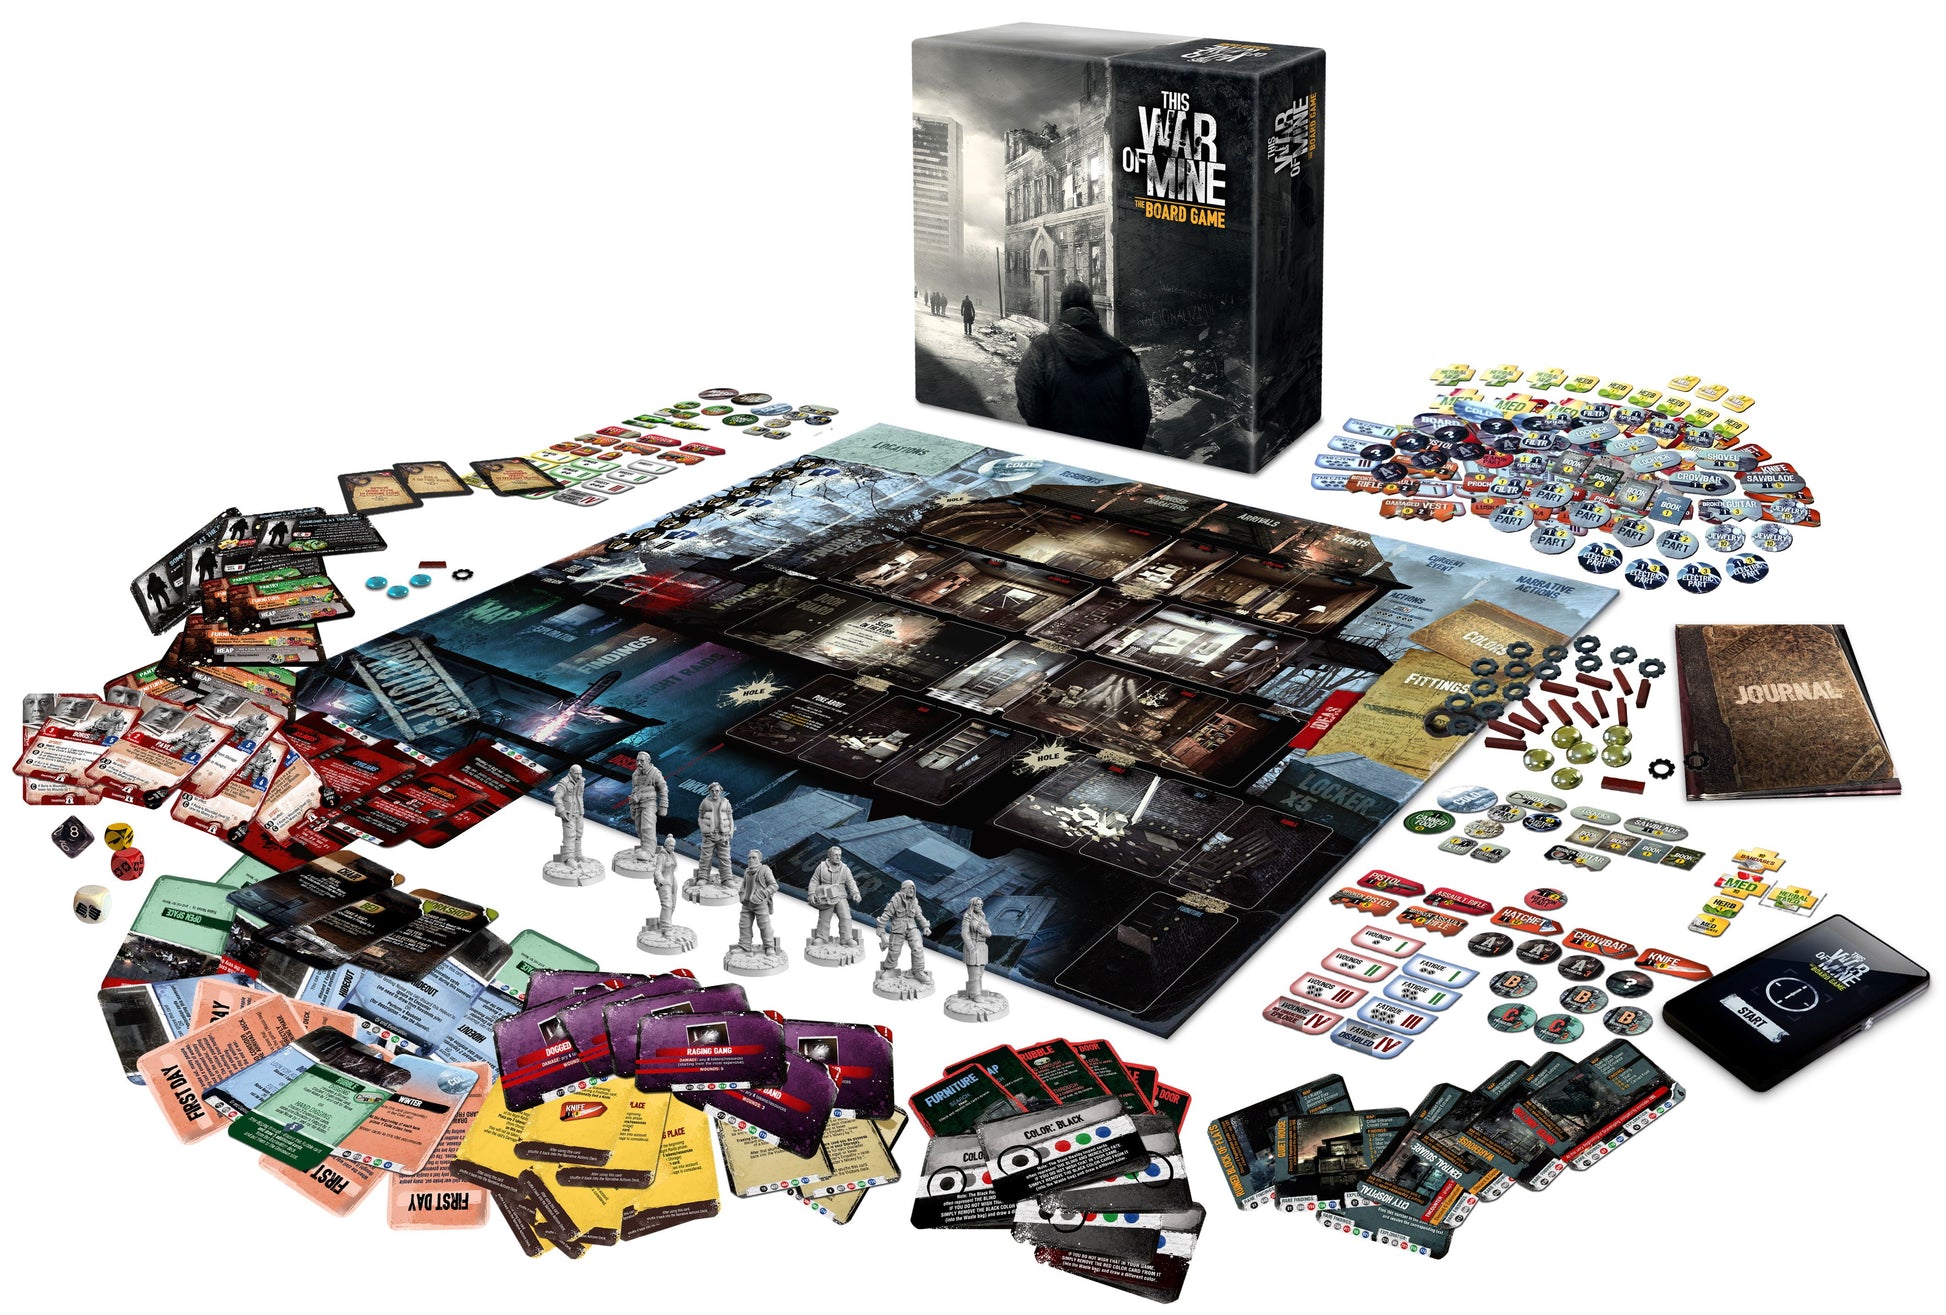 This War of Mine: The Board Game Board Games Ares Games 